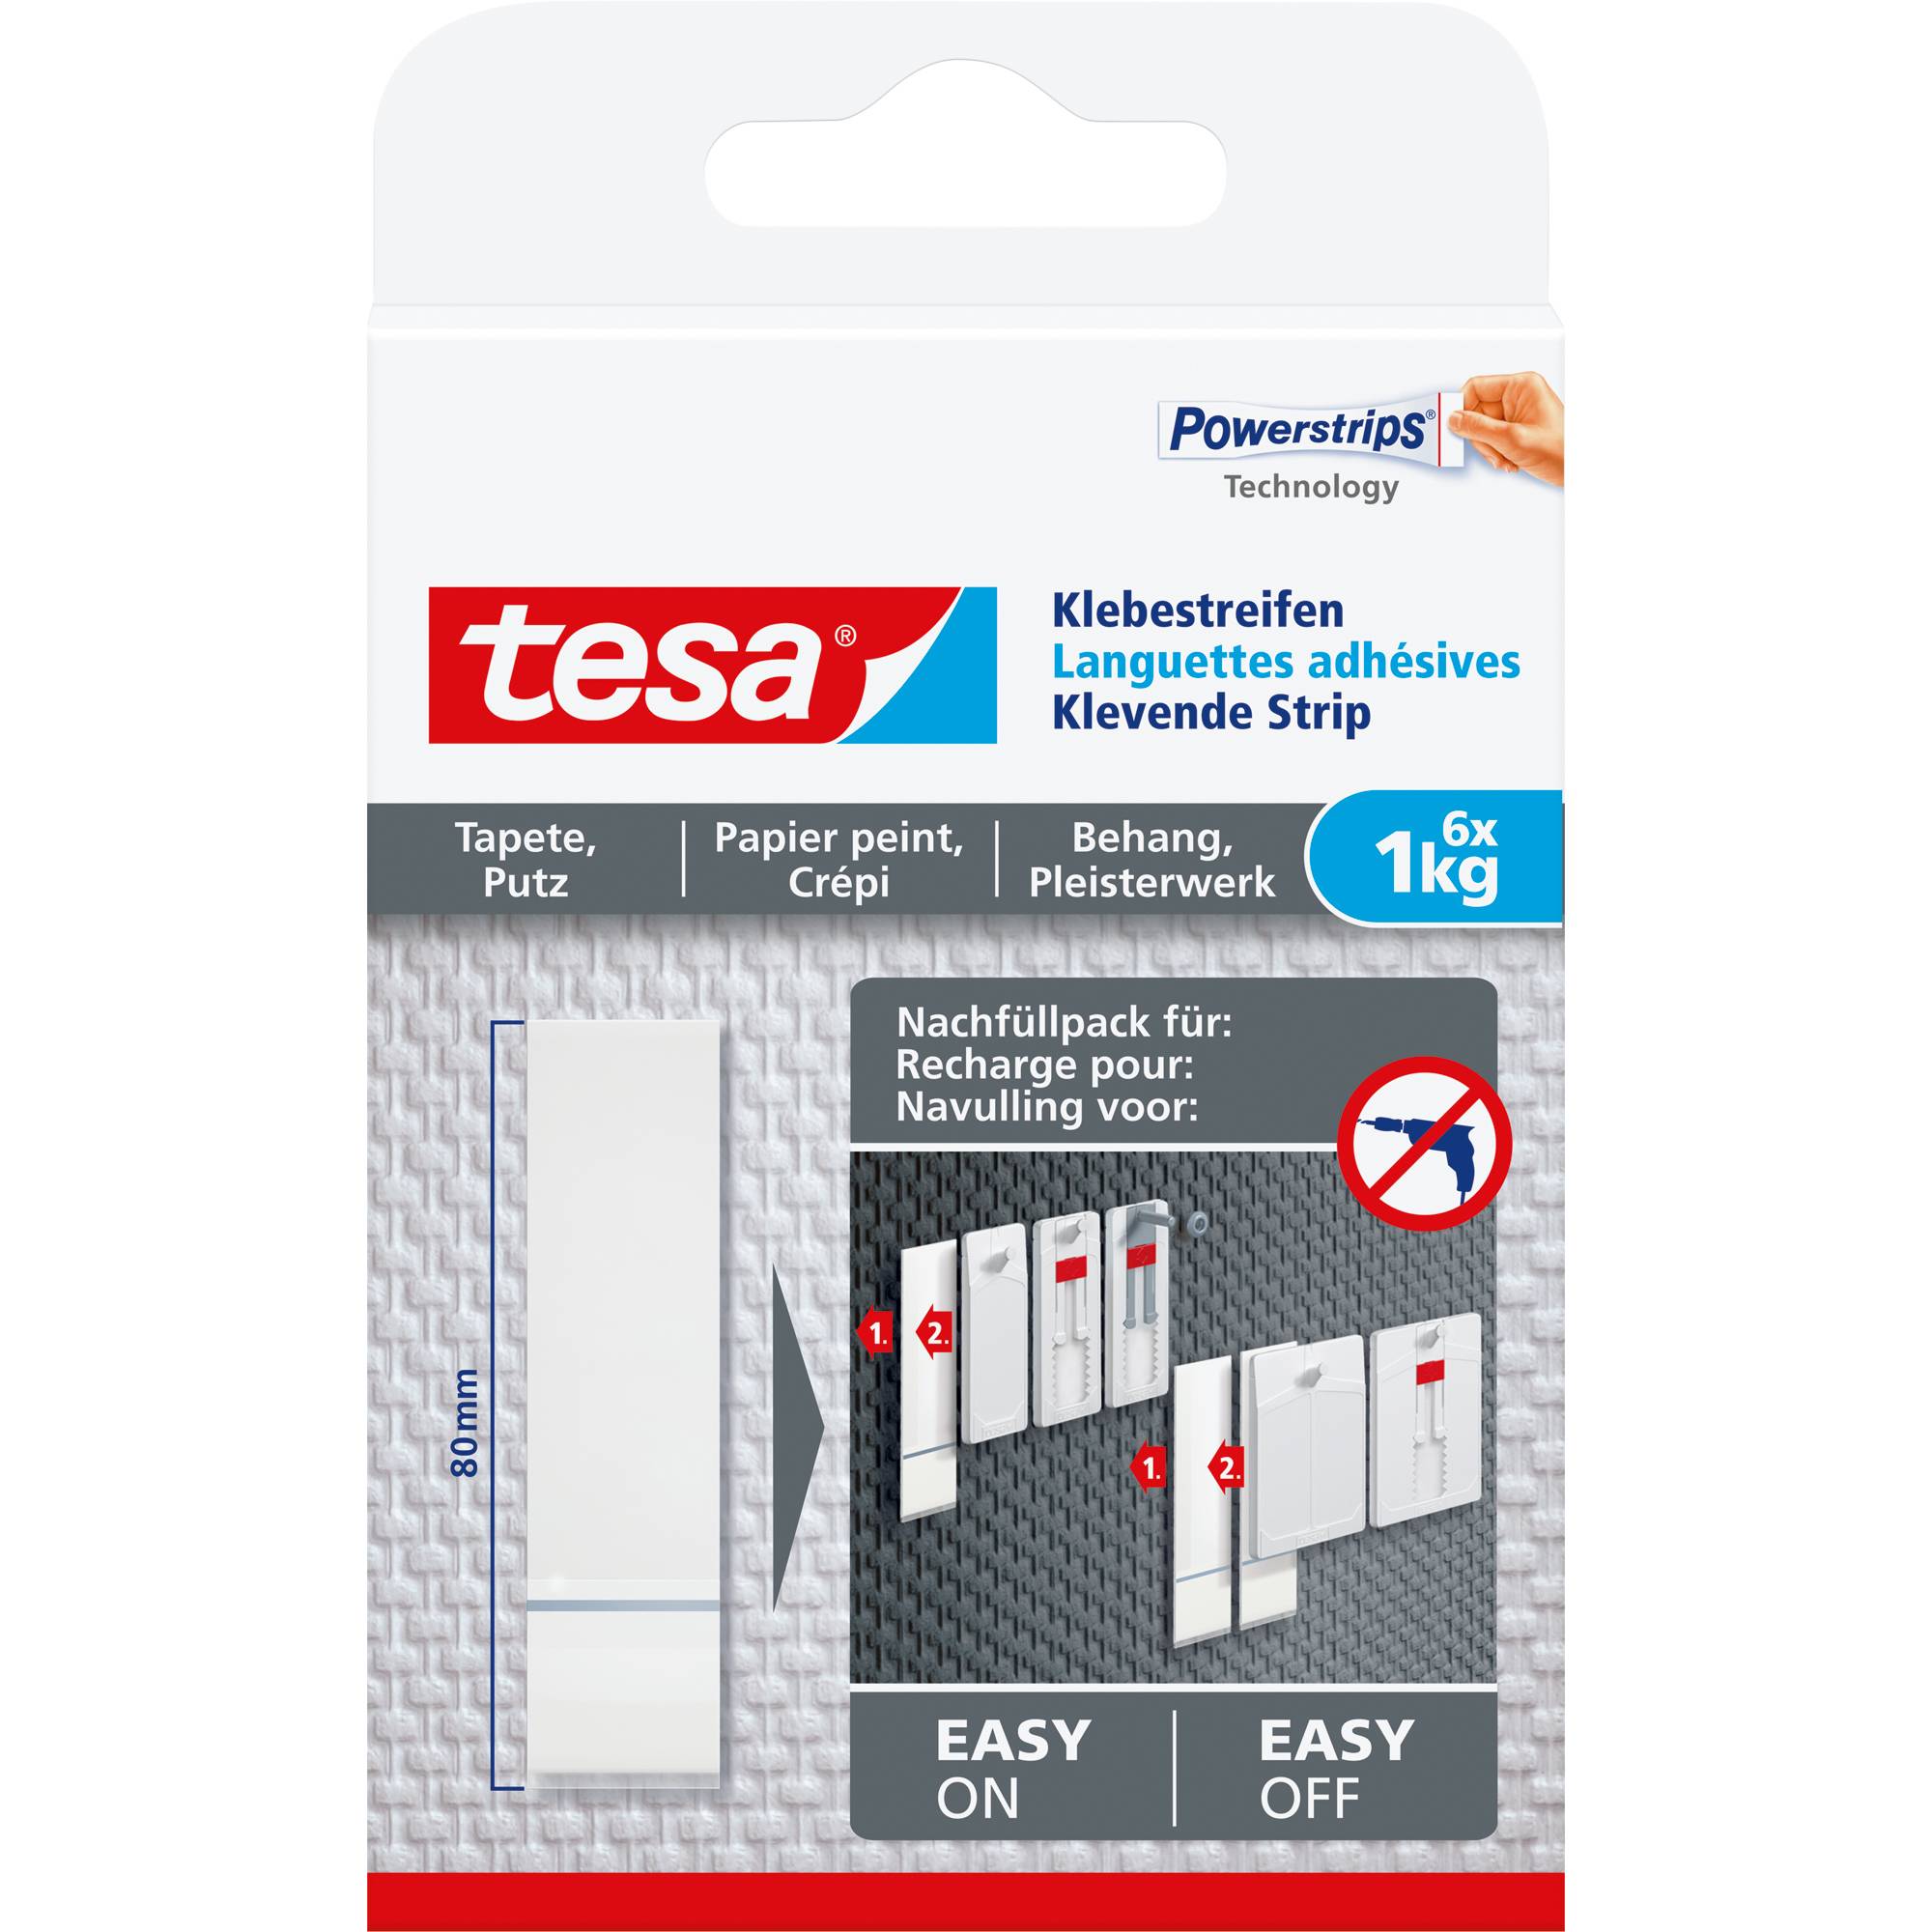 Removable up to 0.5 kg Self-Adhesive tesa Ceiling Hooks with Powerstrips Set of 4 